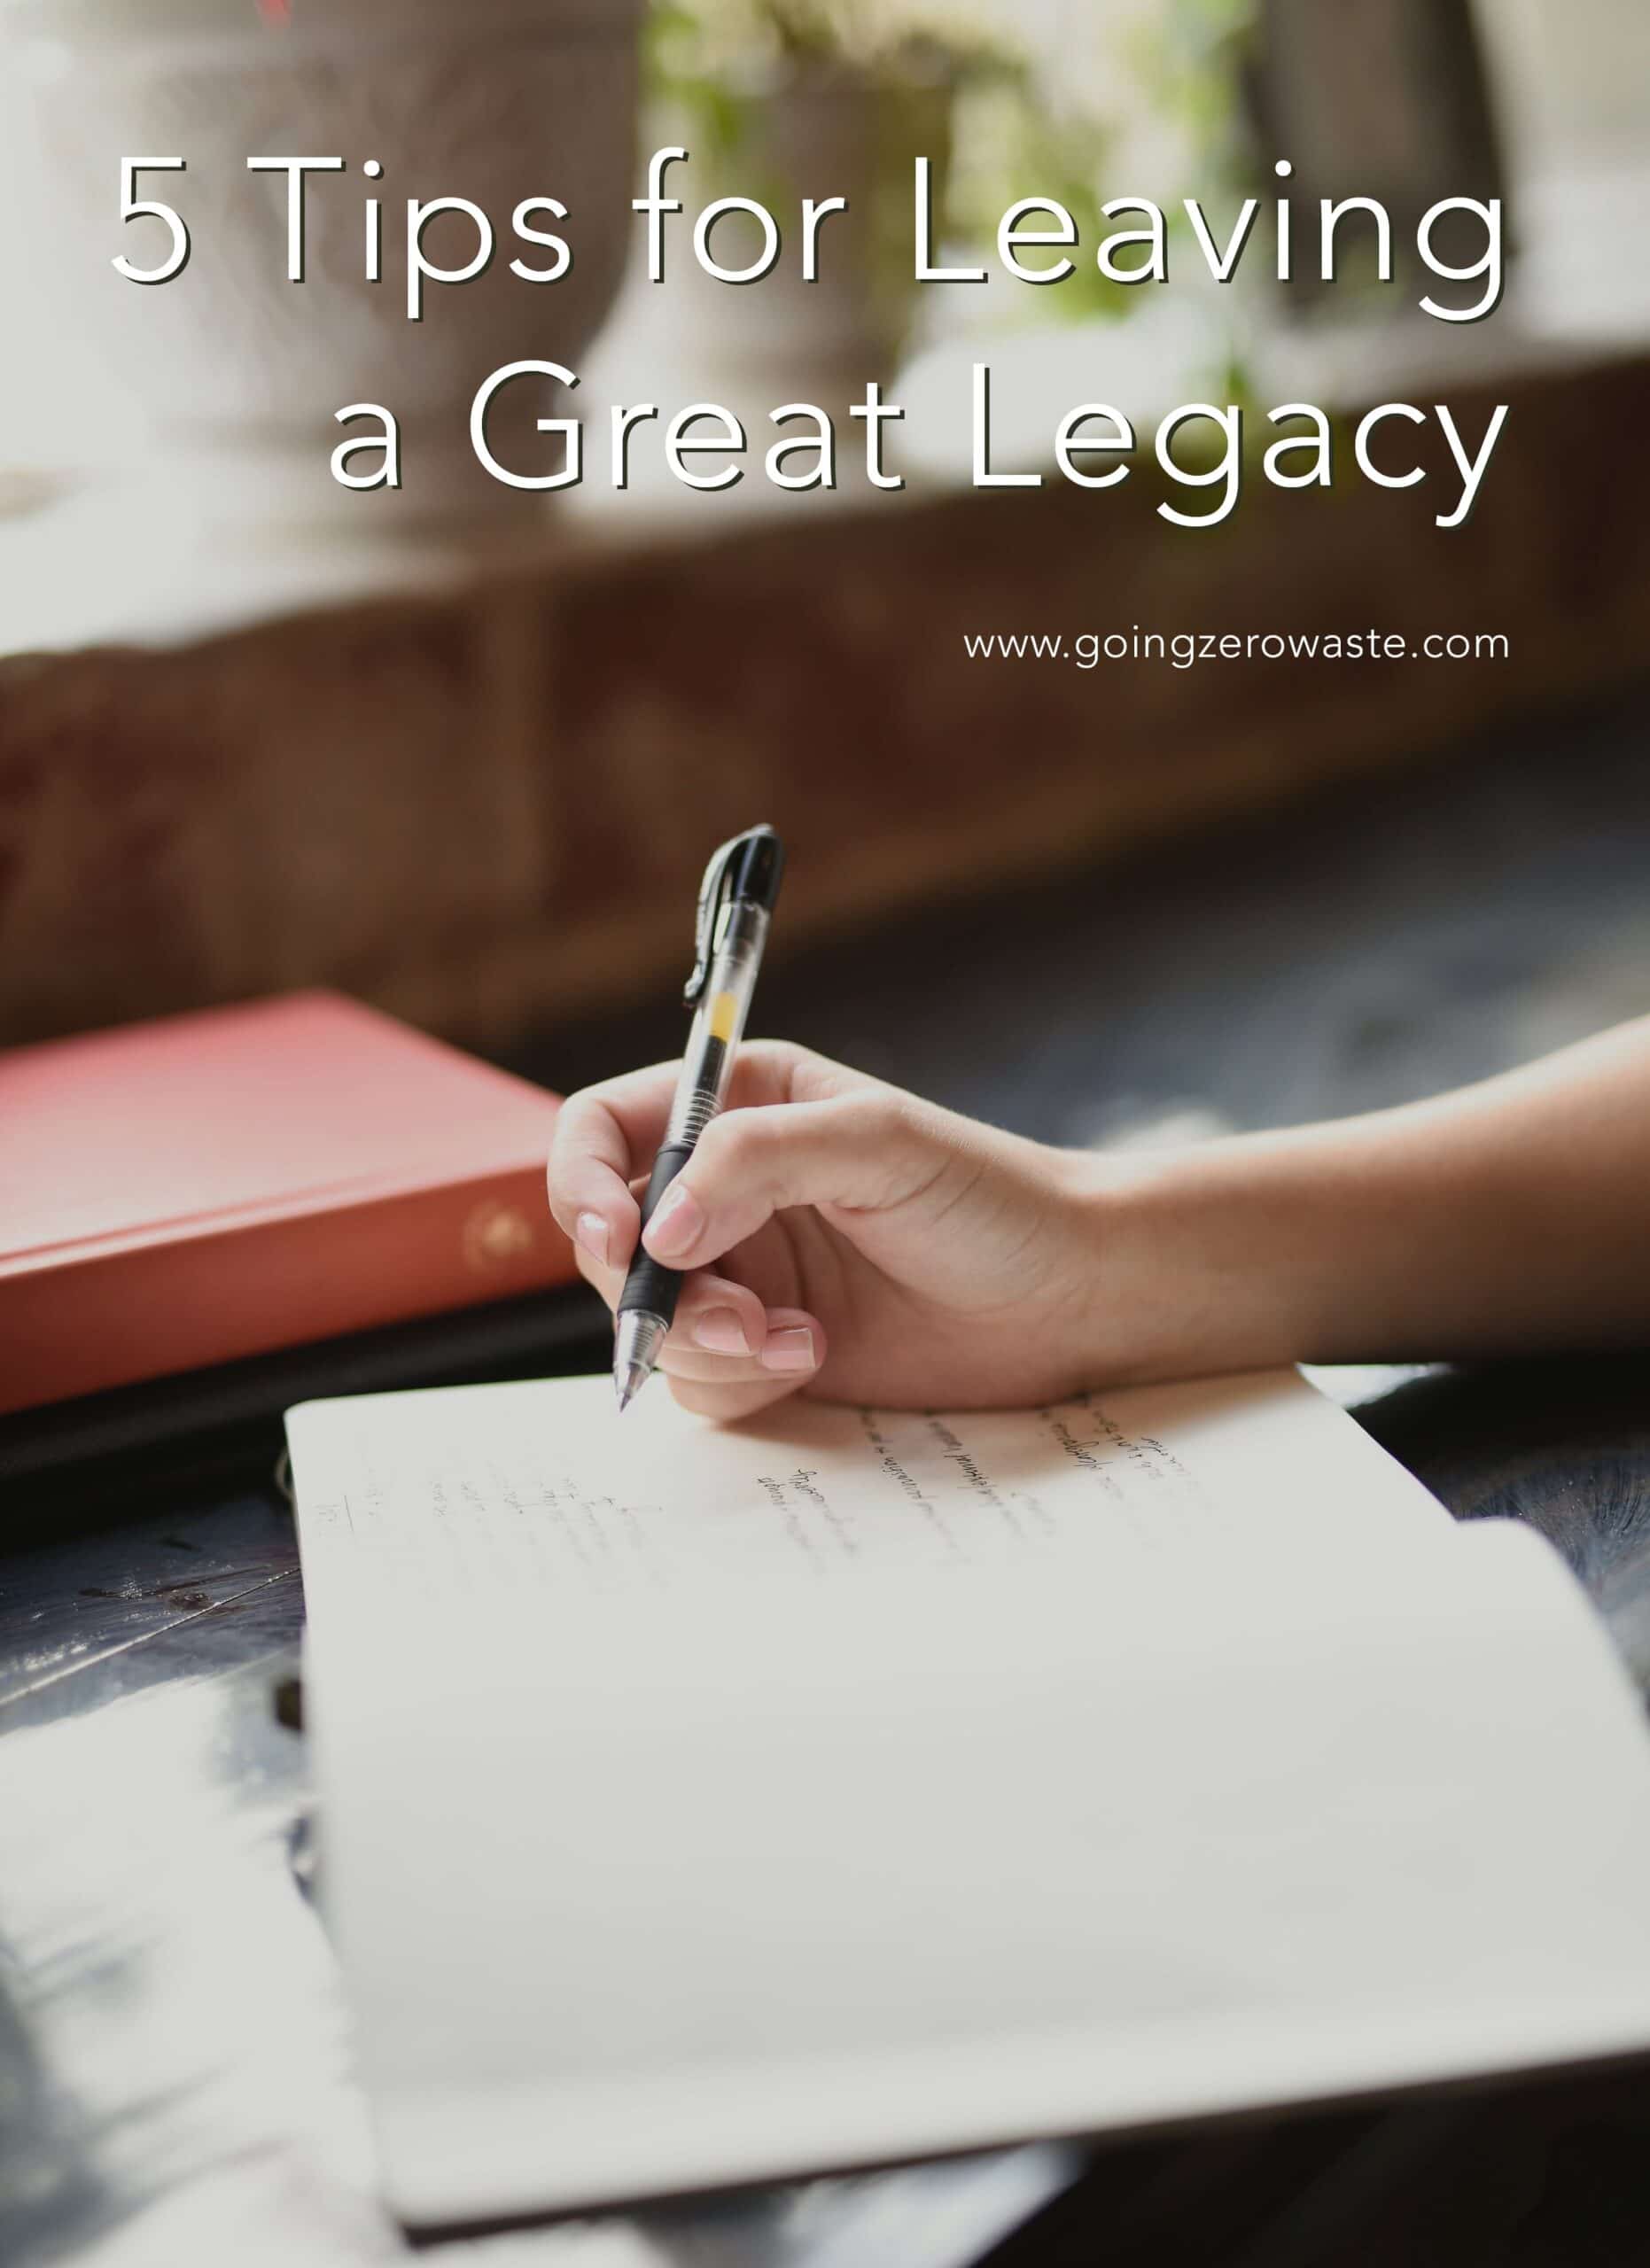 5 Tips for Leaving a Great Legacy